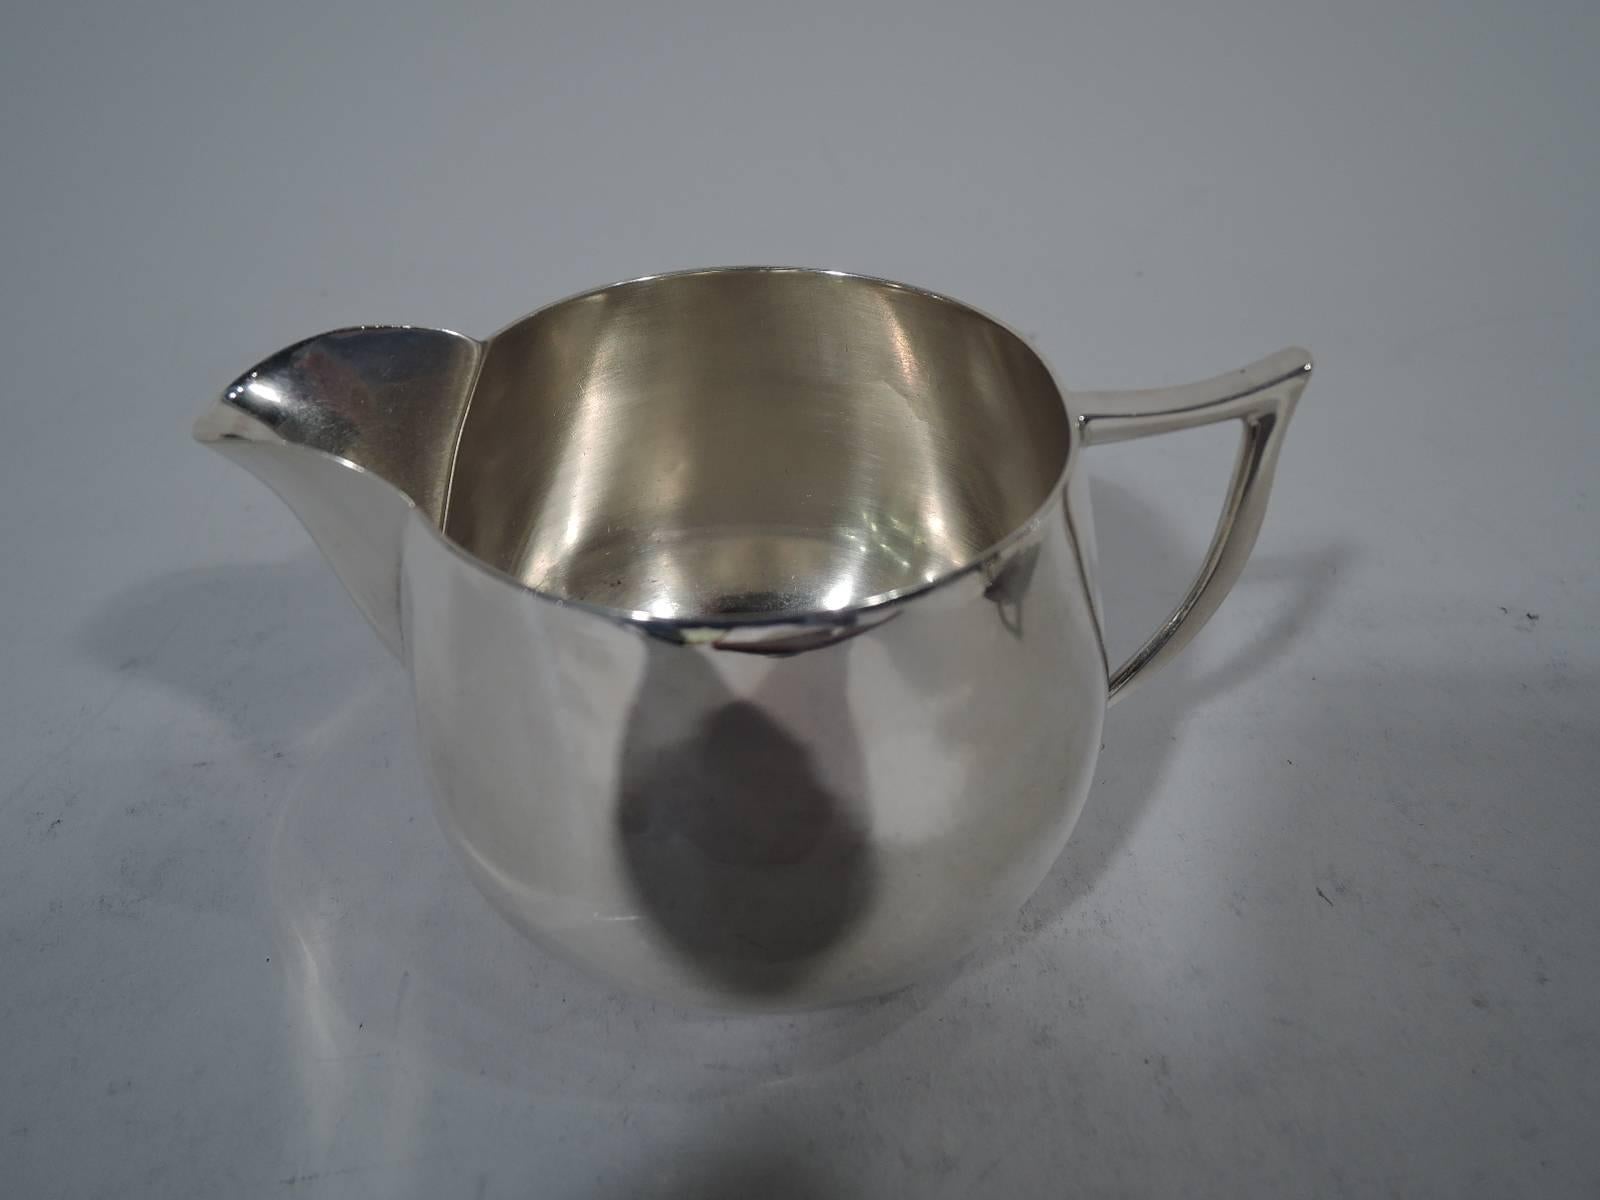 Art Deco sterling silver creamer and sugar. Retailed by Cartier in New York. Upward tapering sides and scrolled bracket handles. Creamer has v-spout. A chic pair. Hallmark includes no. 83, retailer’s name, and maker’s mark Clarence A. Vanderbilt,